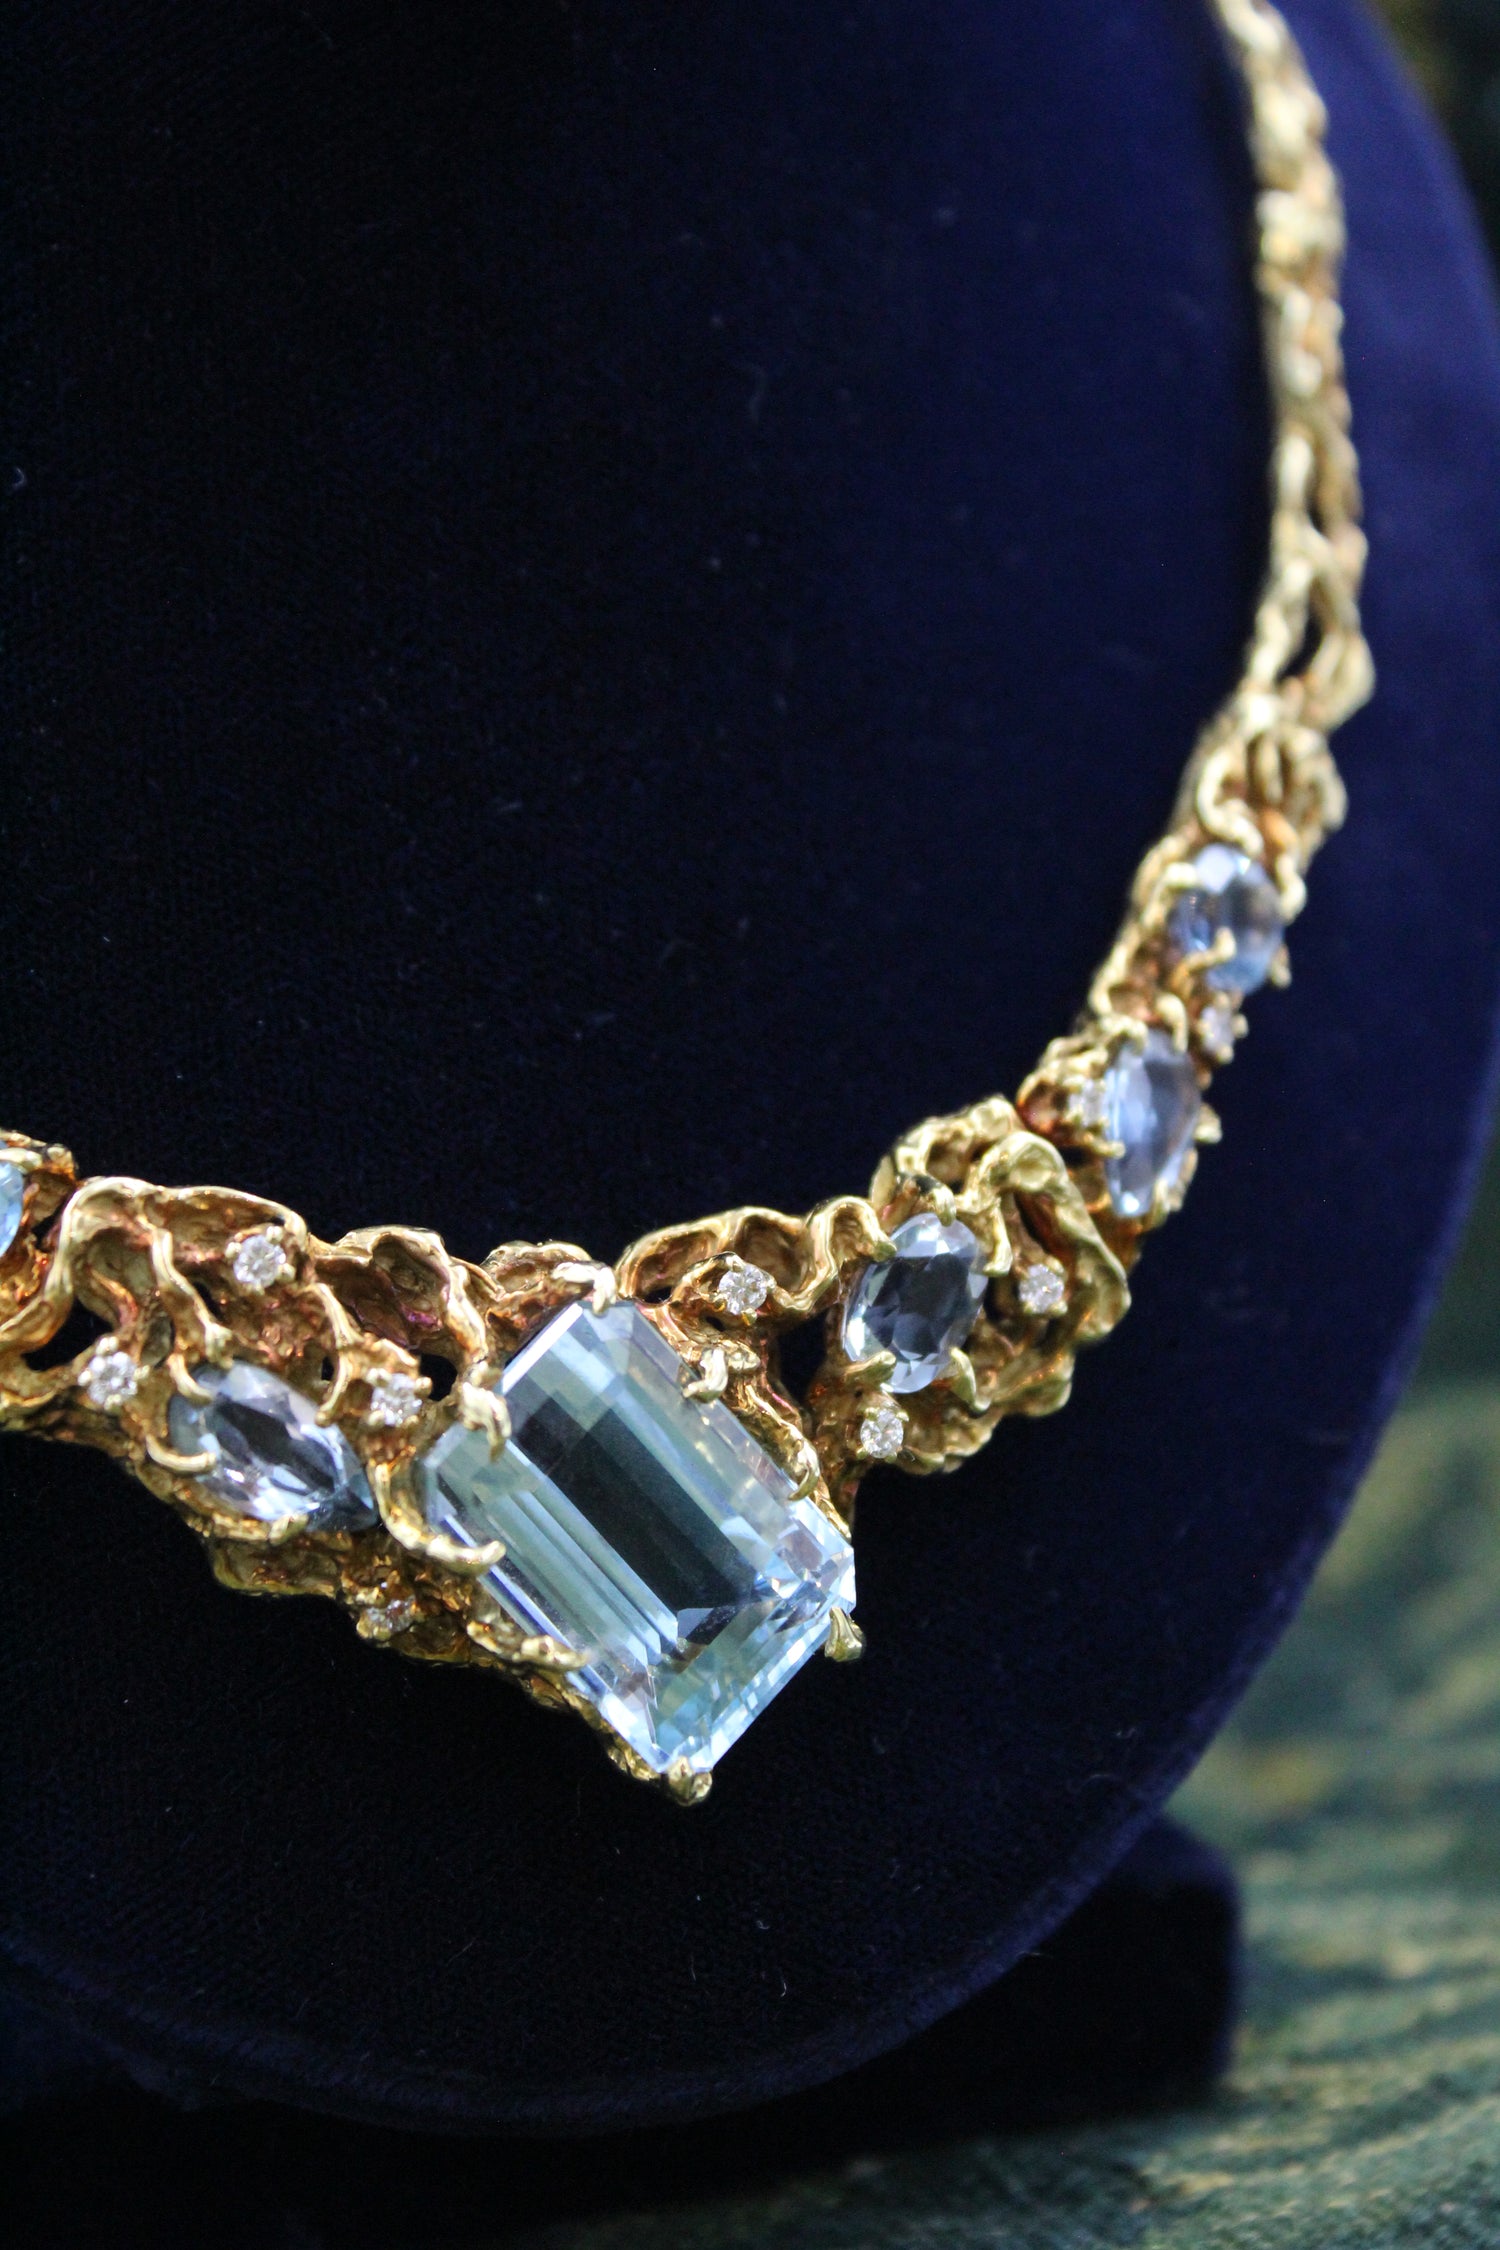 A Stunning 18 Carat Yellow Gold Aquamarine and Diamond Necklace, centrally set with an exceptional  Natural, Untreated Octagonal  Aquamarine of 27.11 Carats. Circa 1970. - Robin Haydock Antiques